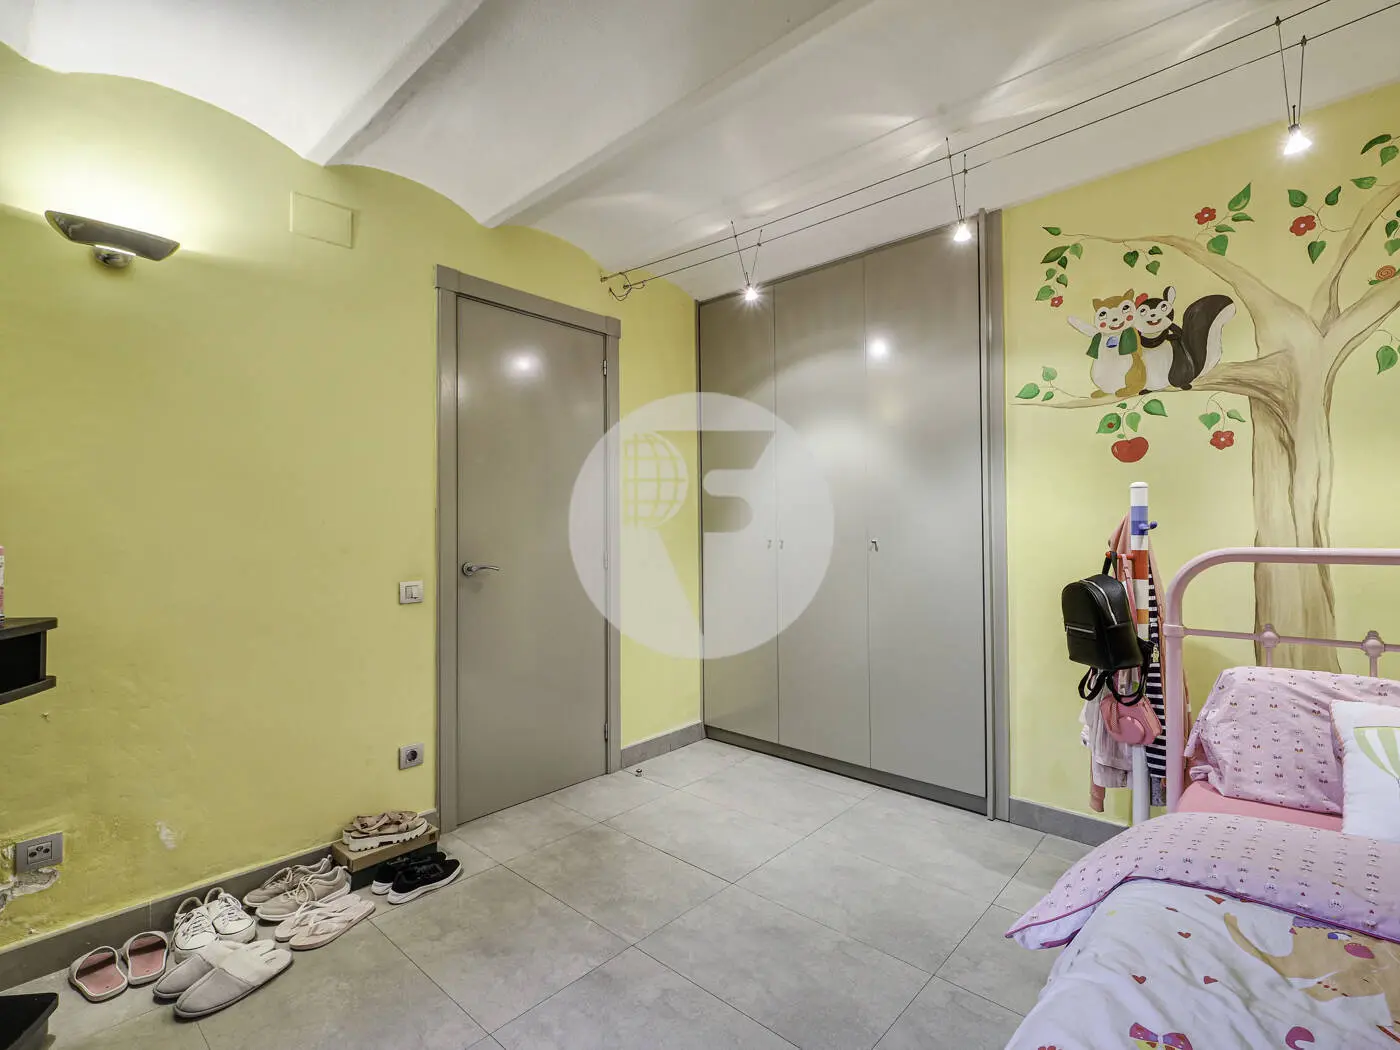 Fantastic 185m² house with garden and terrace in the Sarrià neighborhood of Barcelona 13